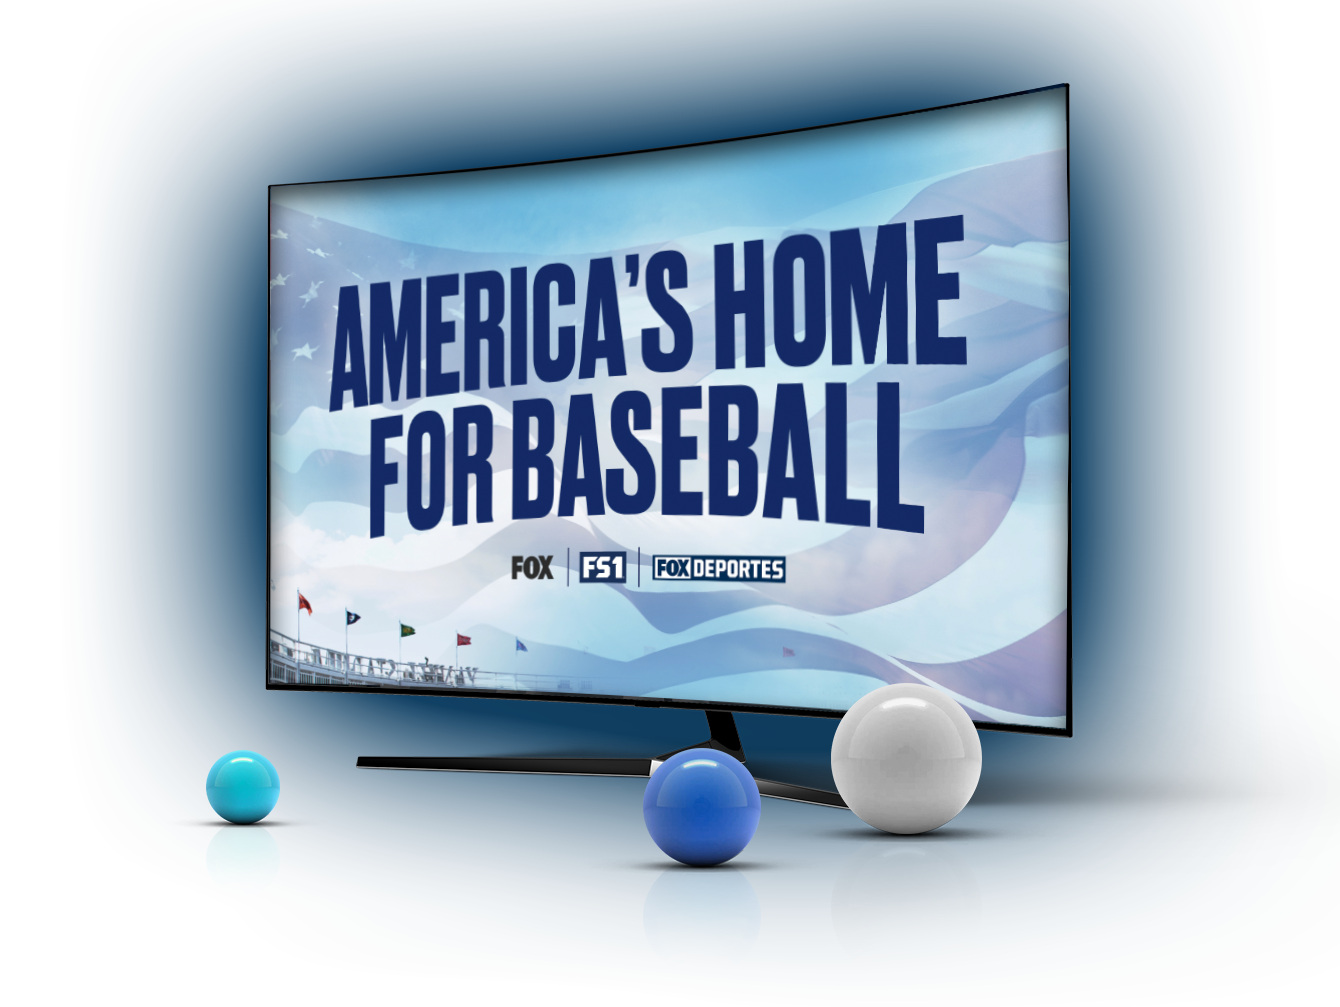 America's Home For Baseball - Fox, FS1, and Fox Deportes